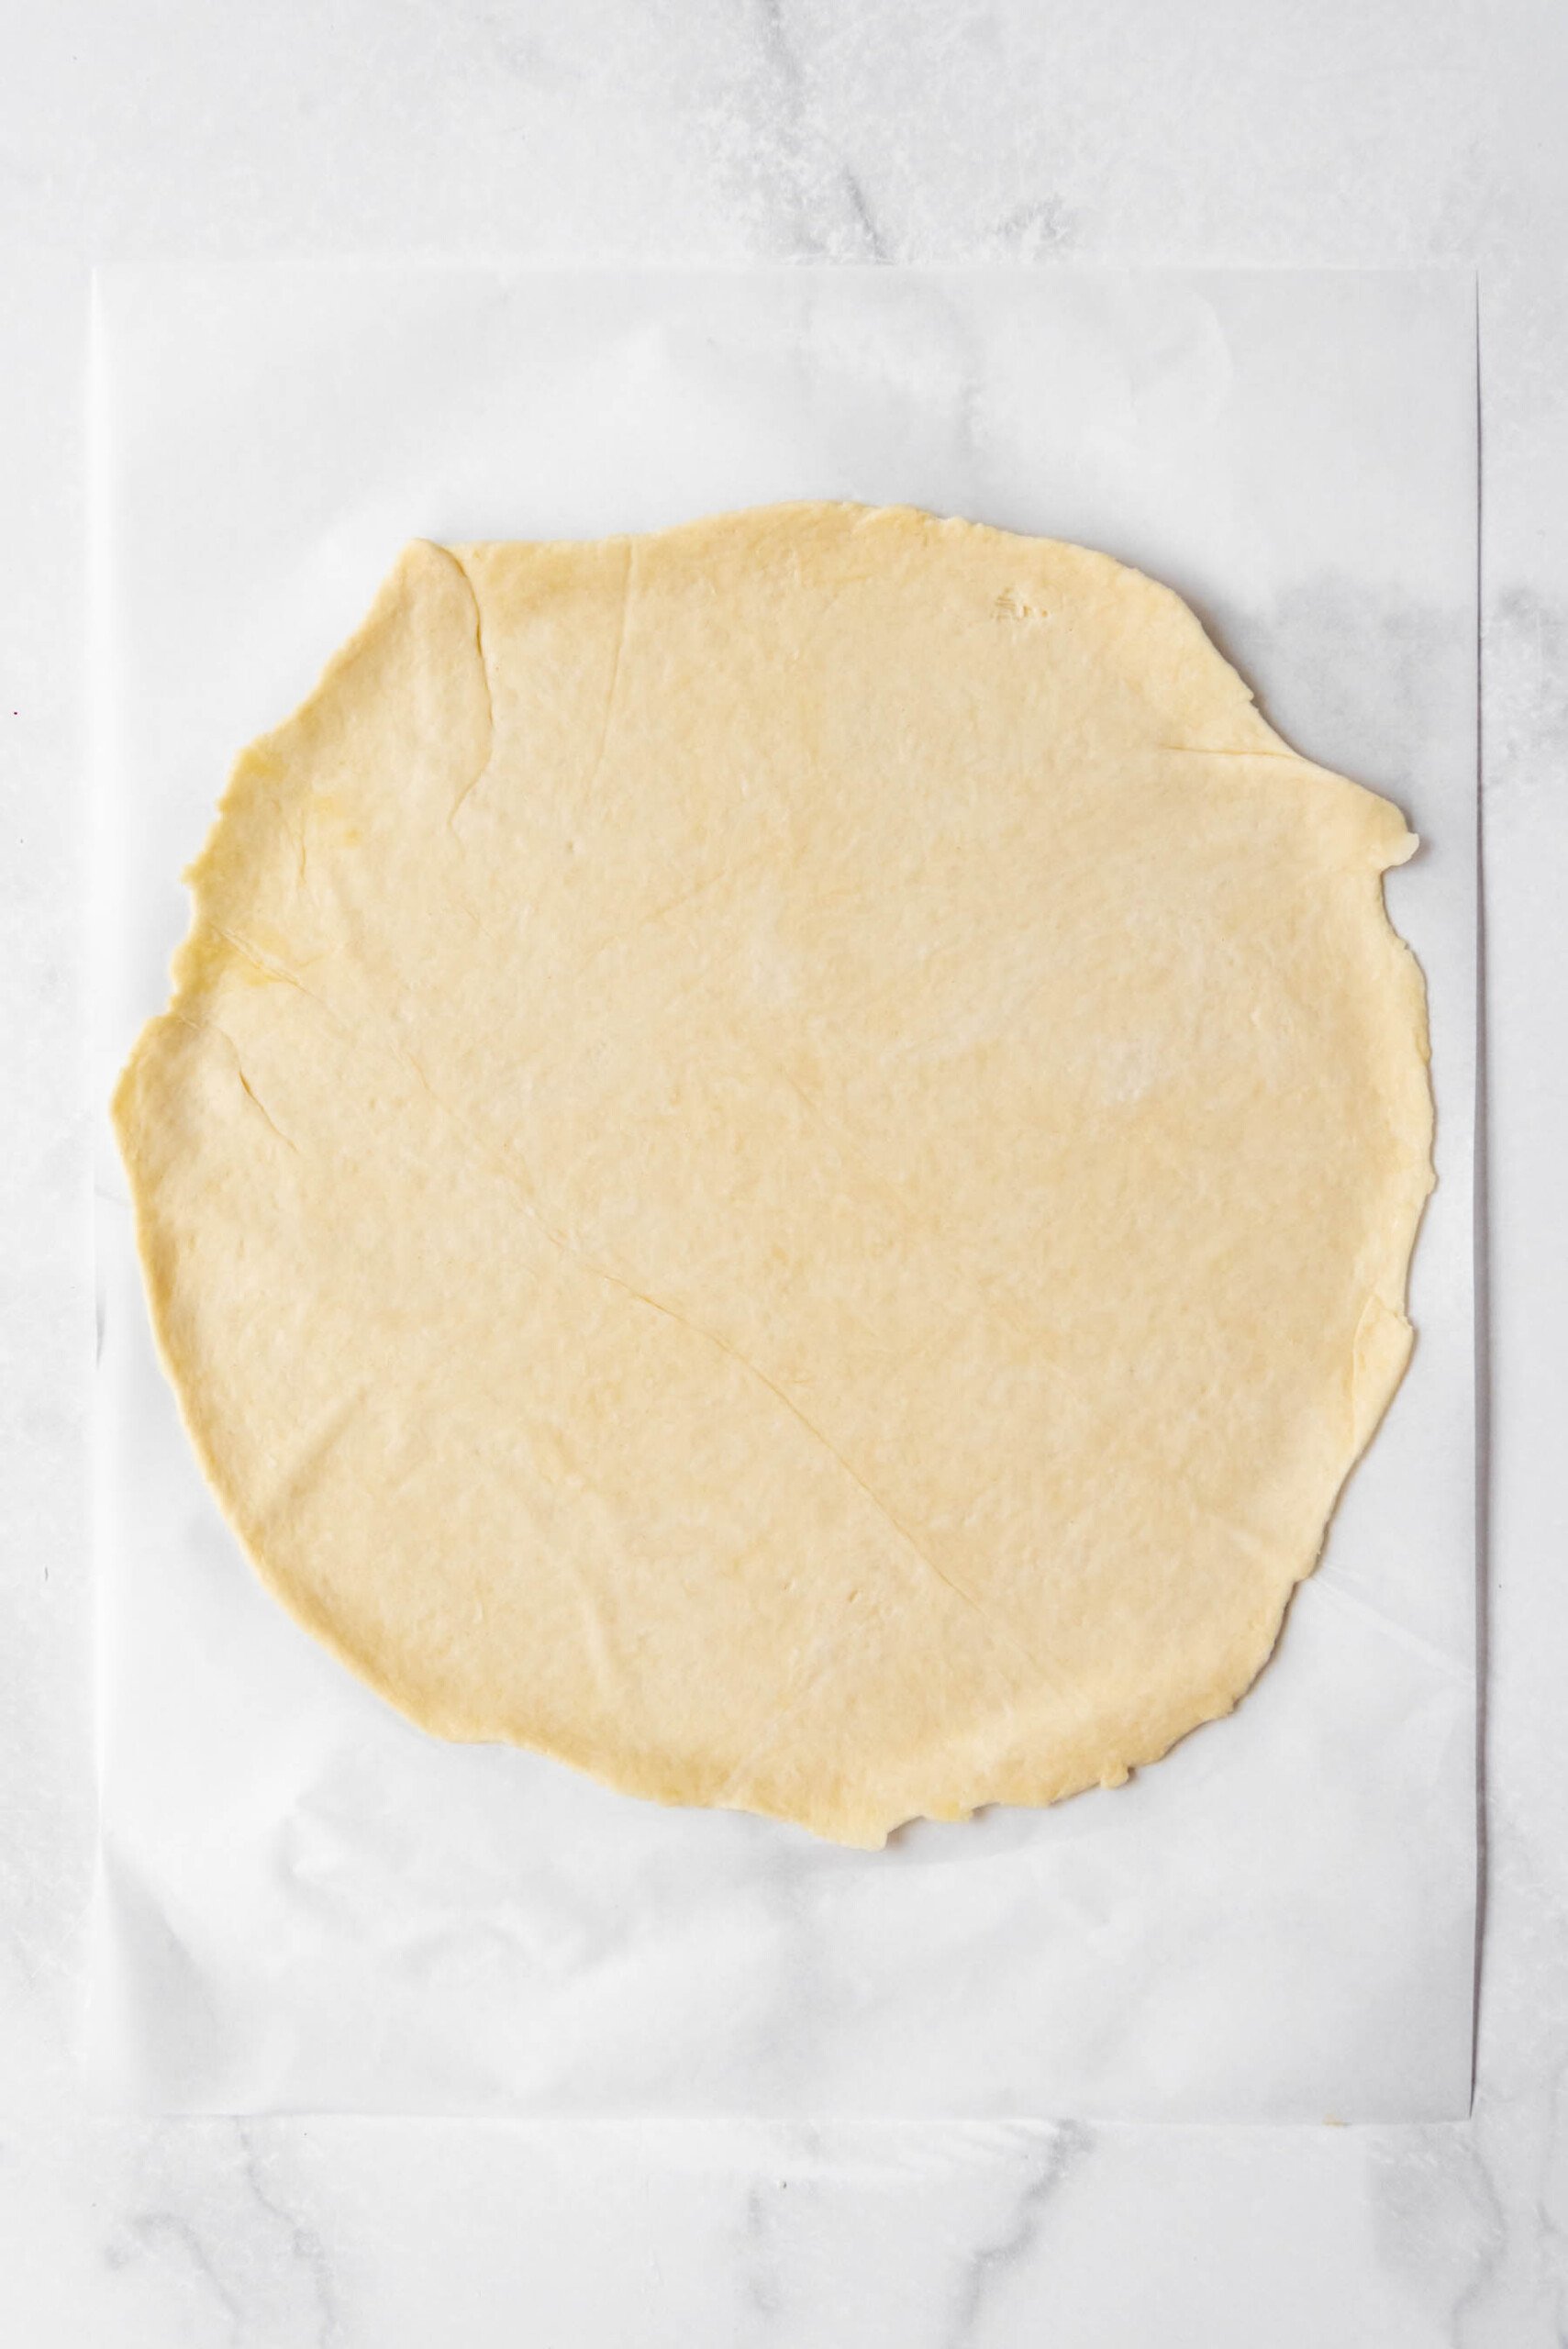 A pizza crust rolled out thin on parchment paper.